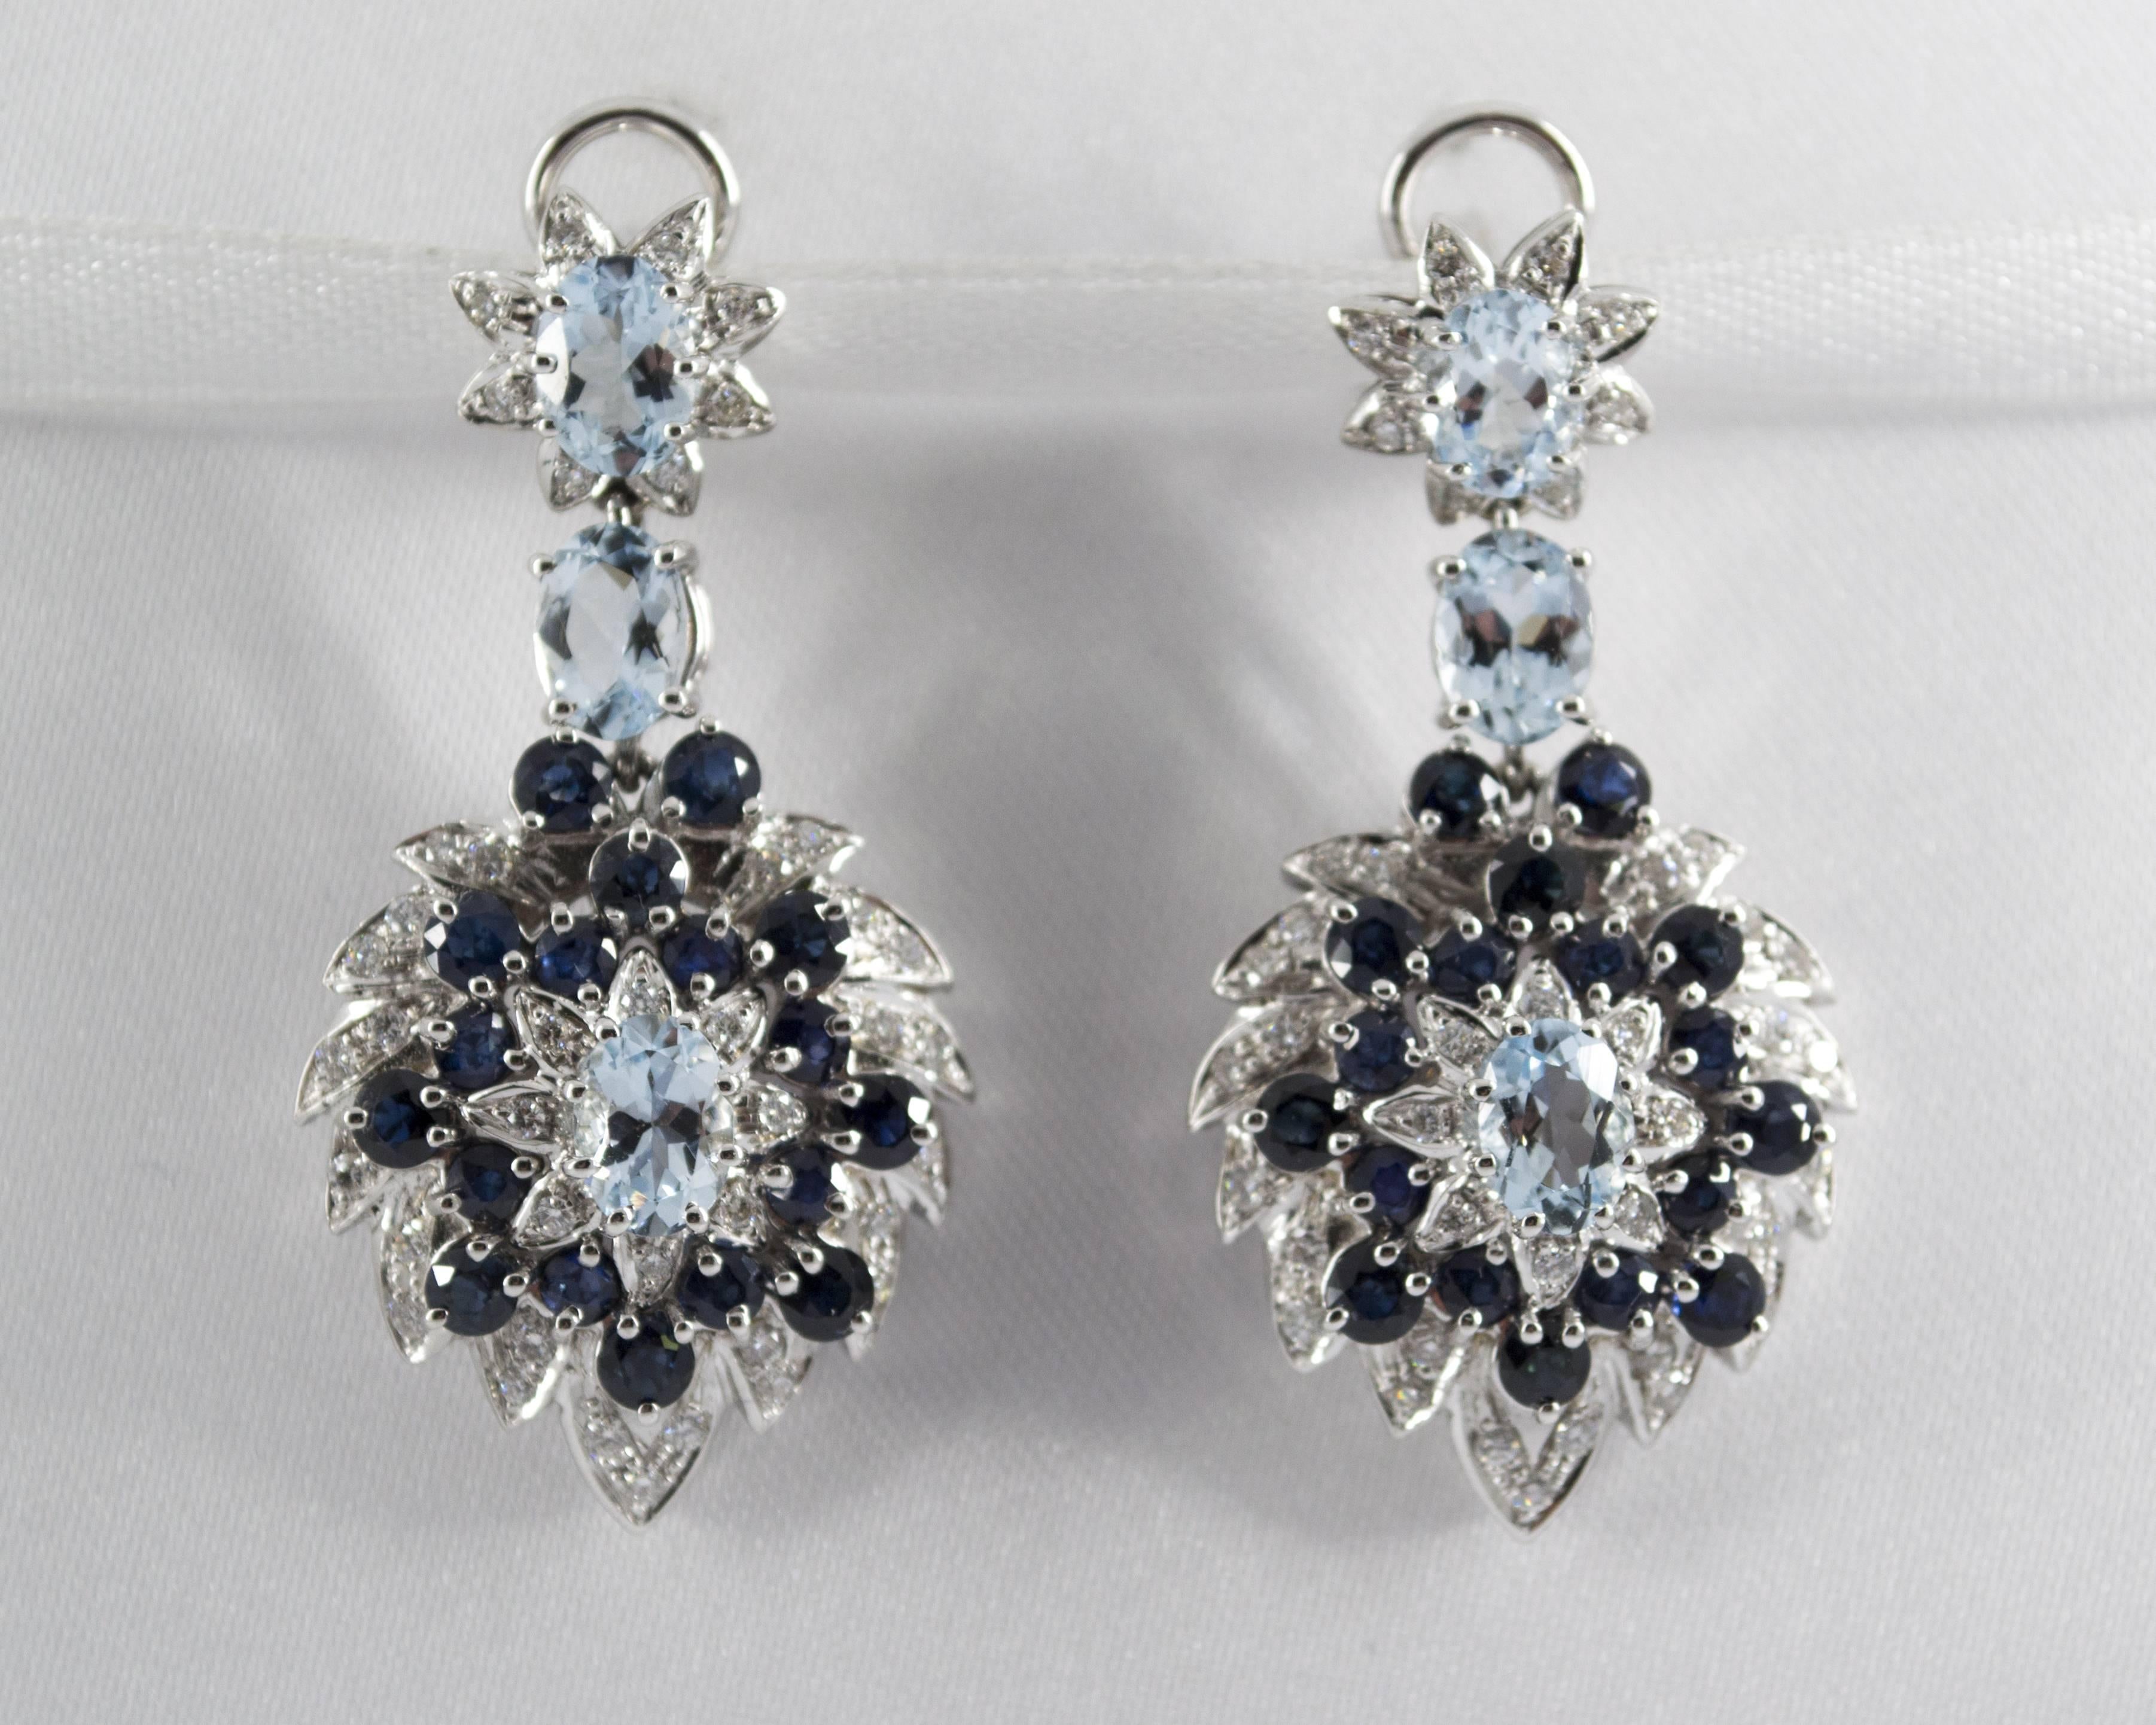 These Earrings are made of 18K White Gold.
These Earrings have 1.00 Carats of White Diamonds.
These Earrings have 5.10 Carats of Blue Sapphires.
These Earrings have also 4.00 Carats of Aquamarines.
All our Earrings have pins for pierced ears but we